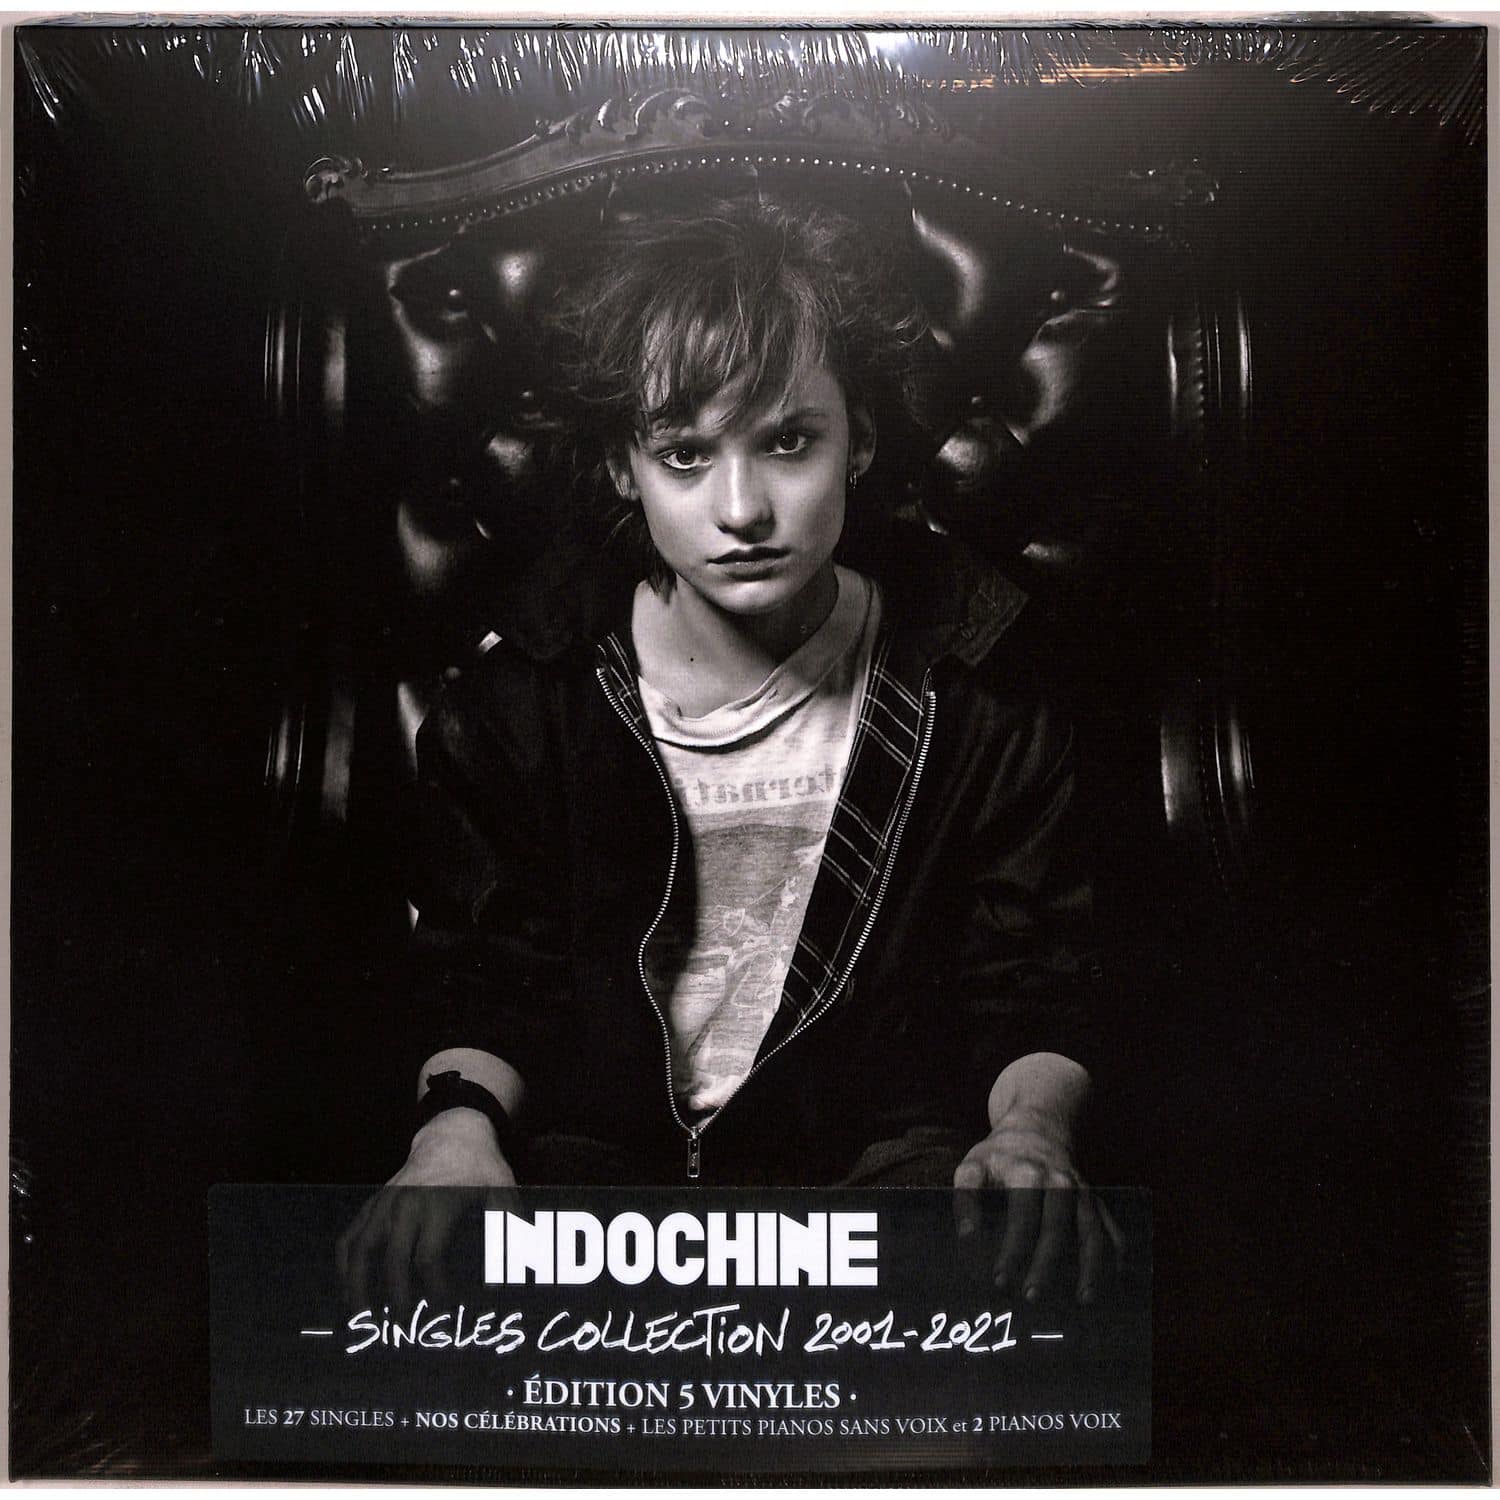 Indochine - SINGLES COLLECTION 